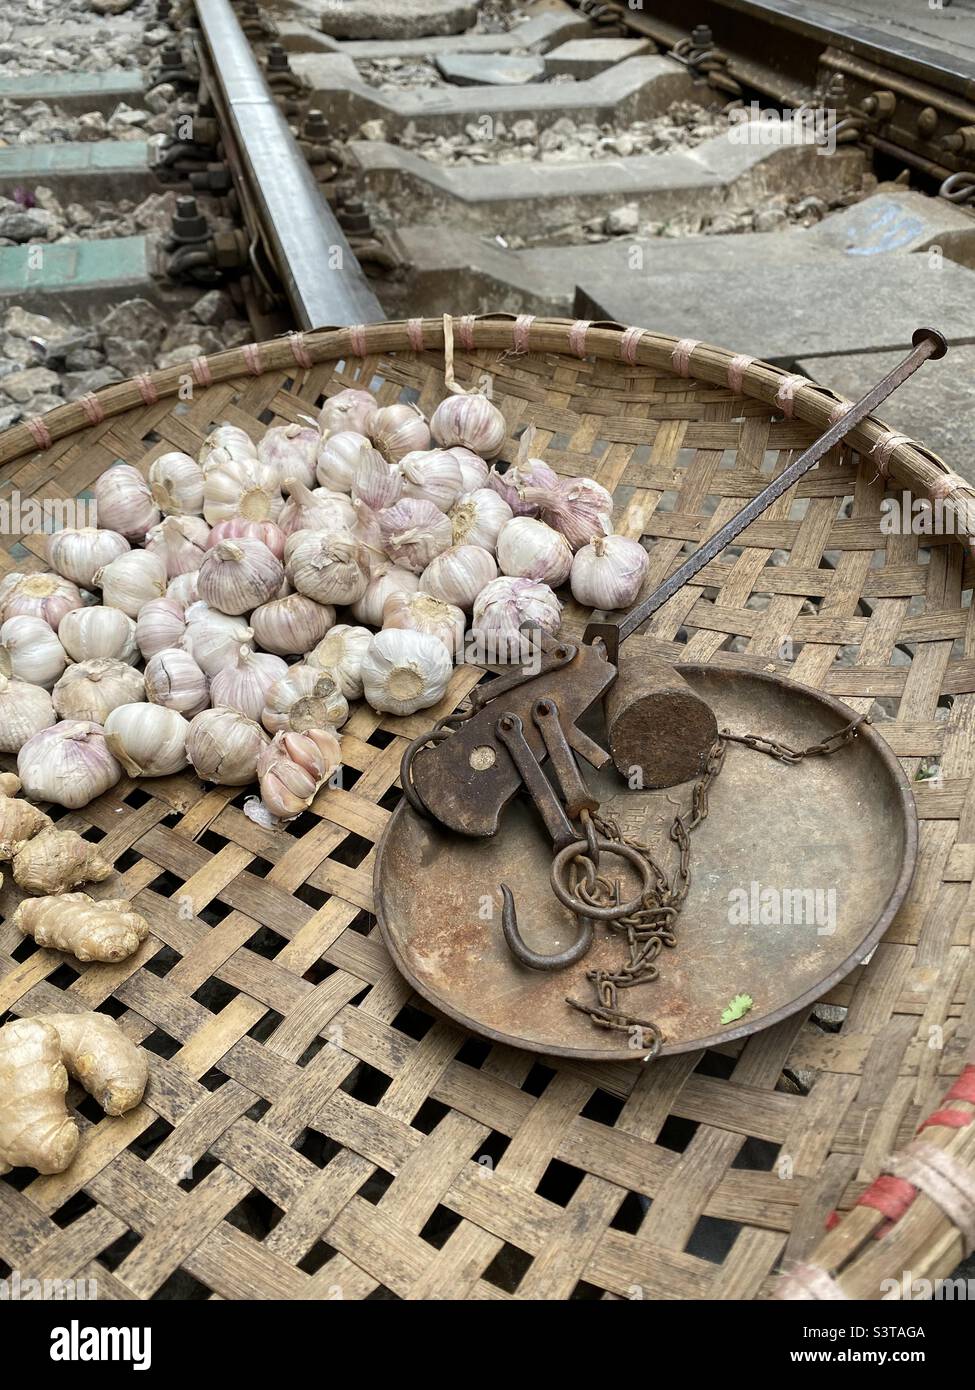 Flat woven basket with garlic, ginger and old scales on a railroad tracks. Stock Photo